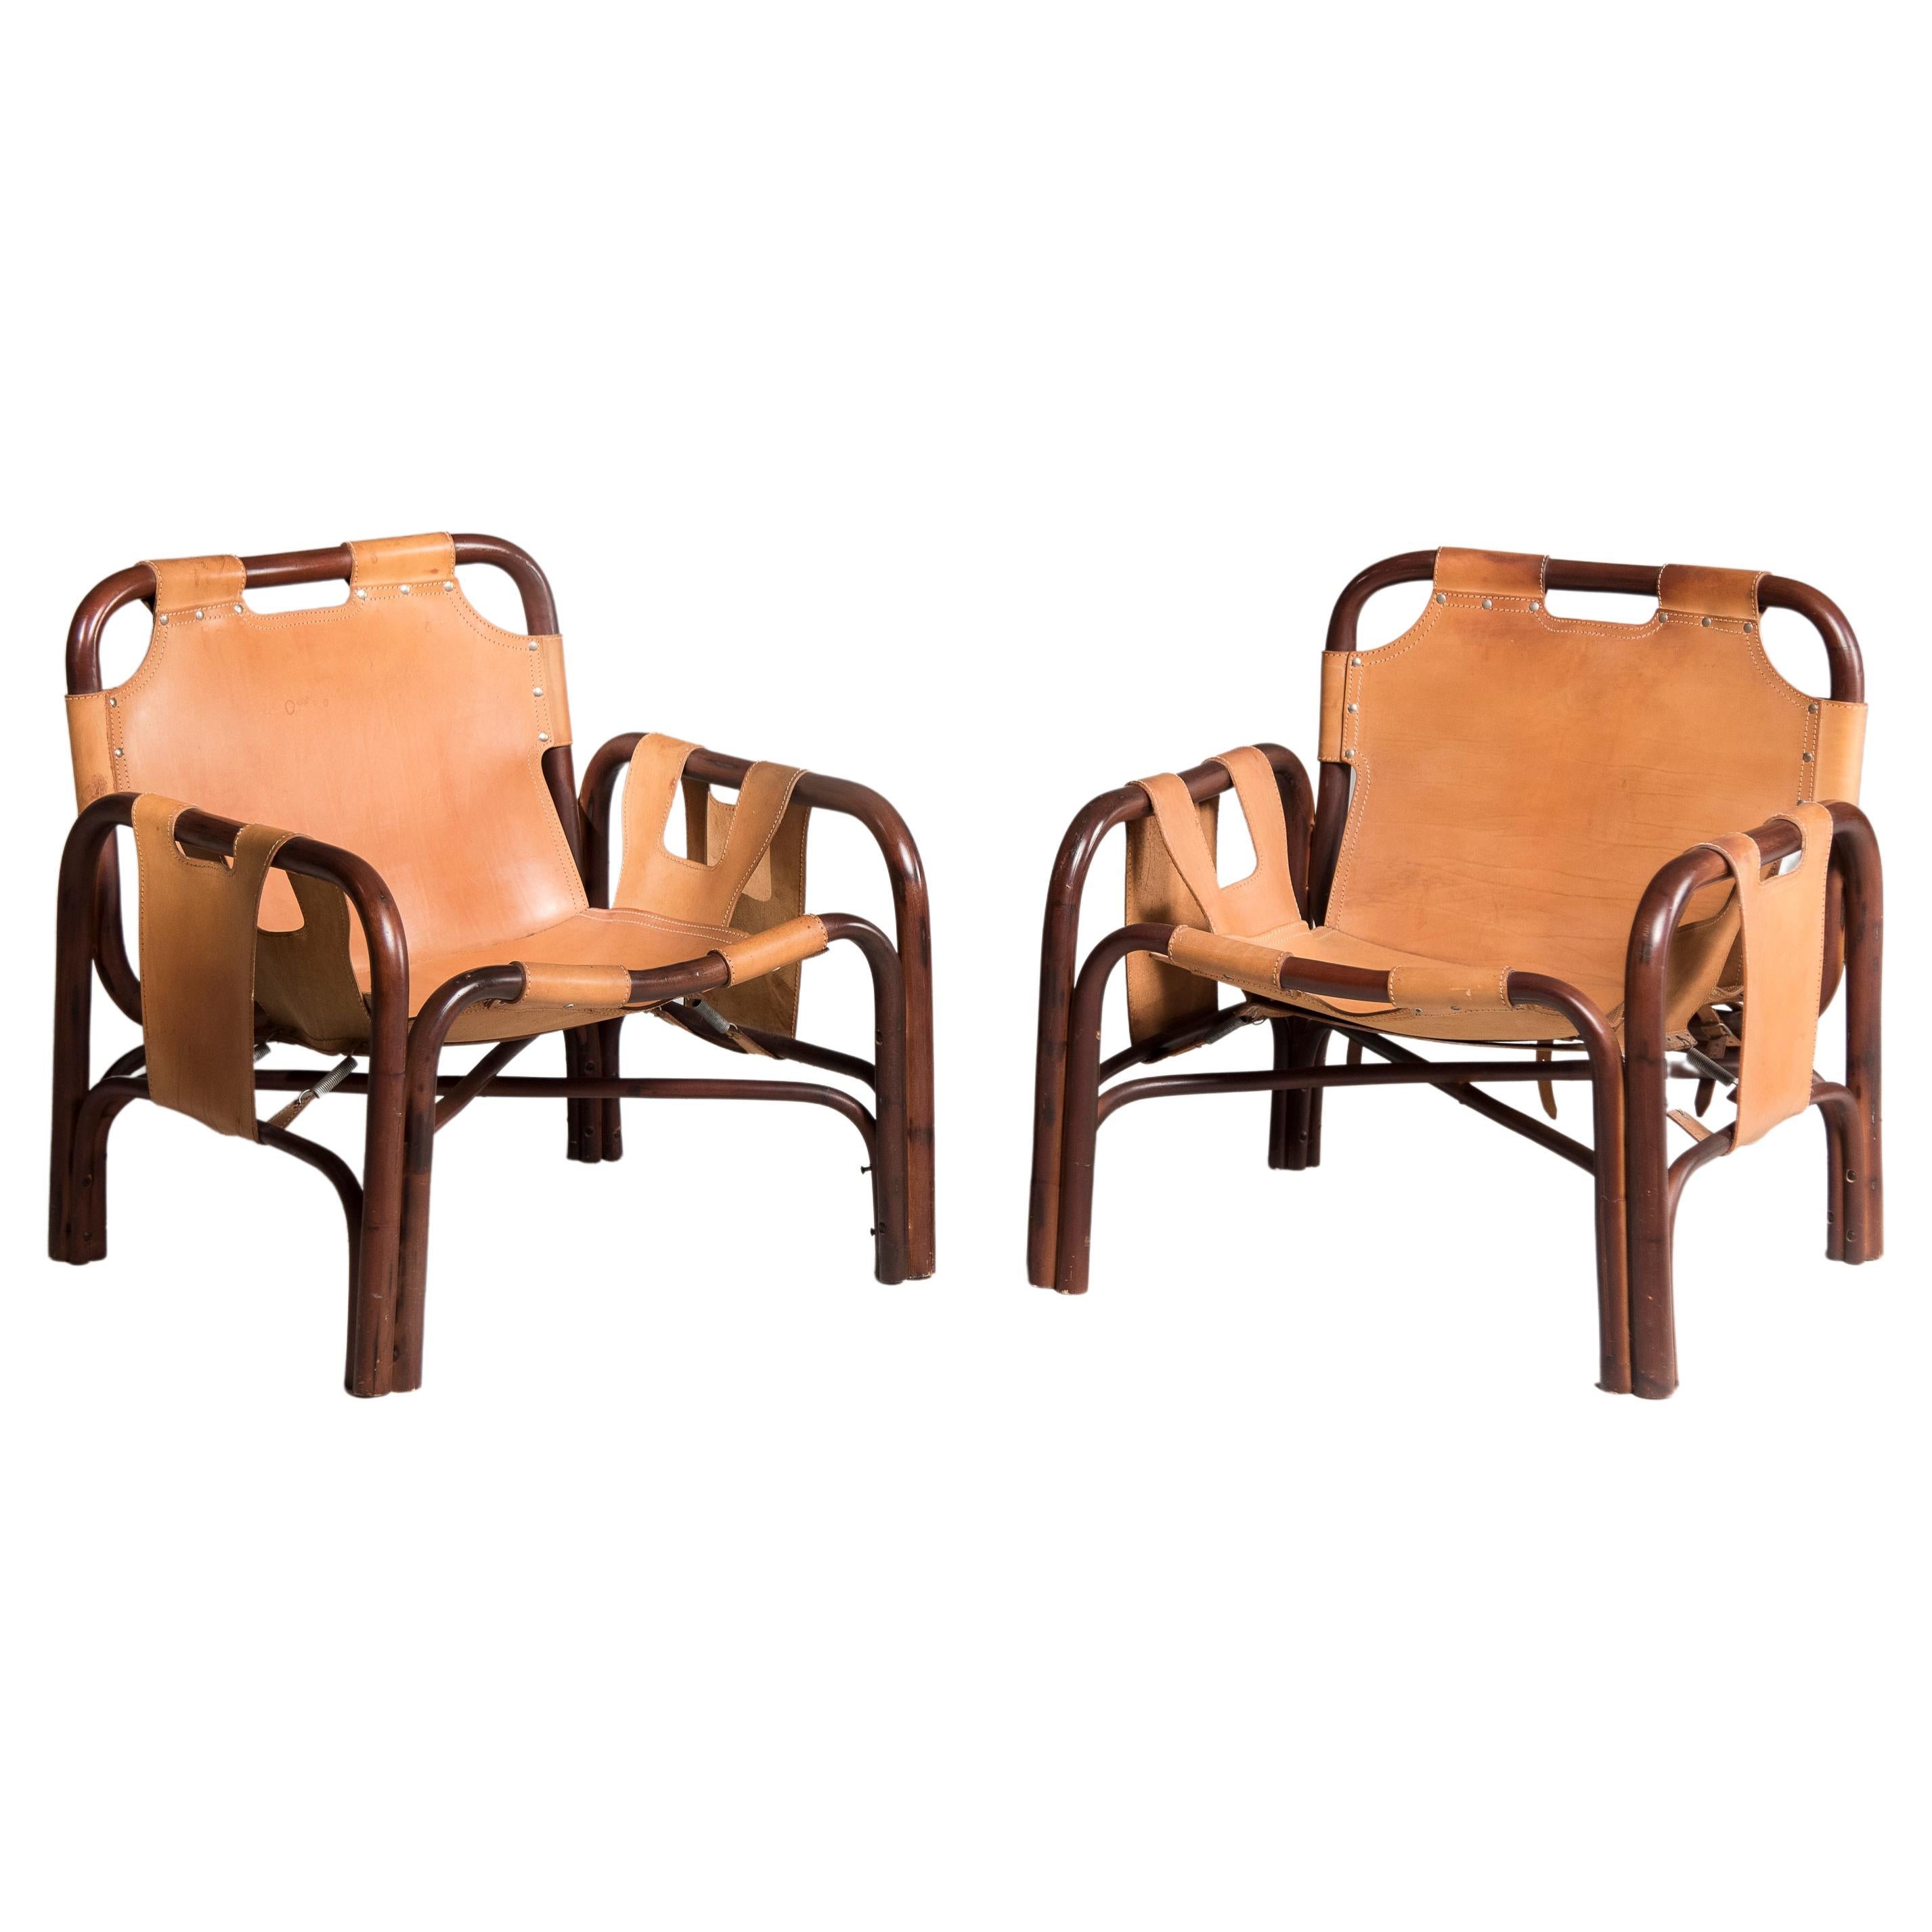 Pair of Tito Agnoli Wood and Leather Armchairs For Sale